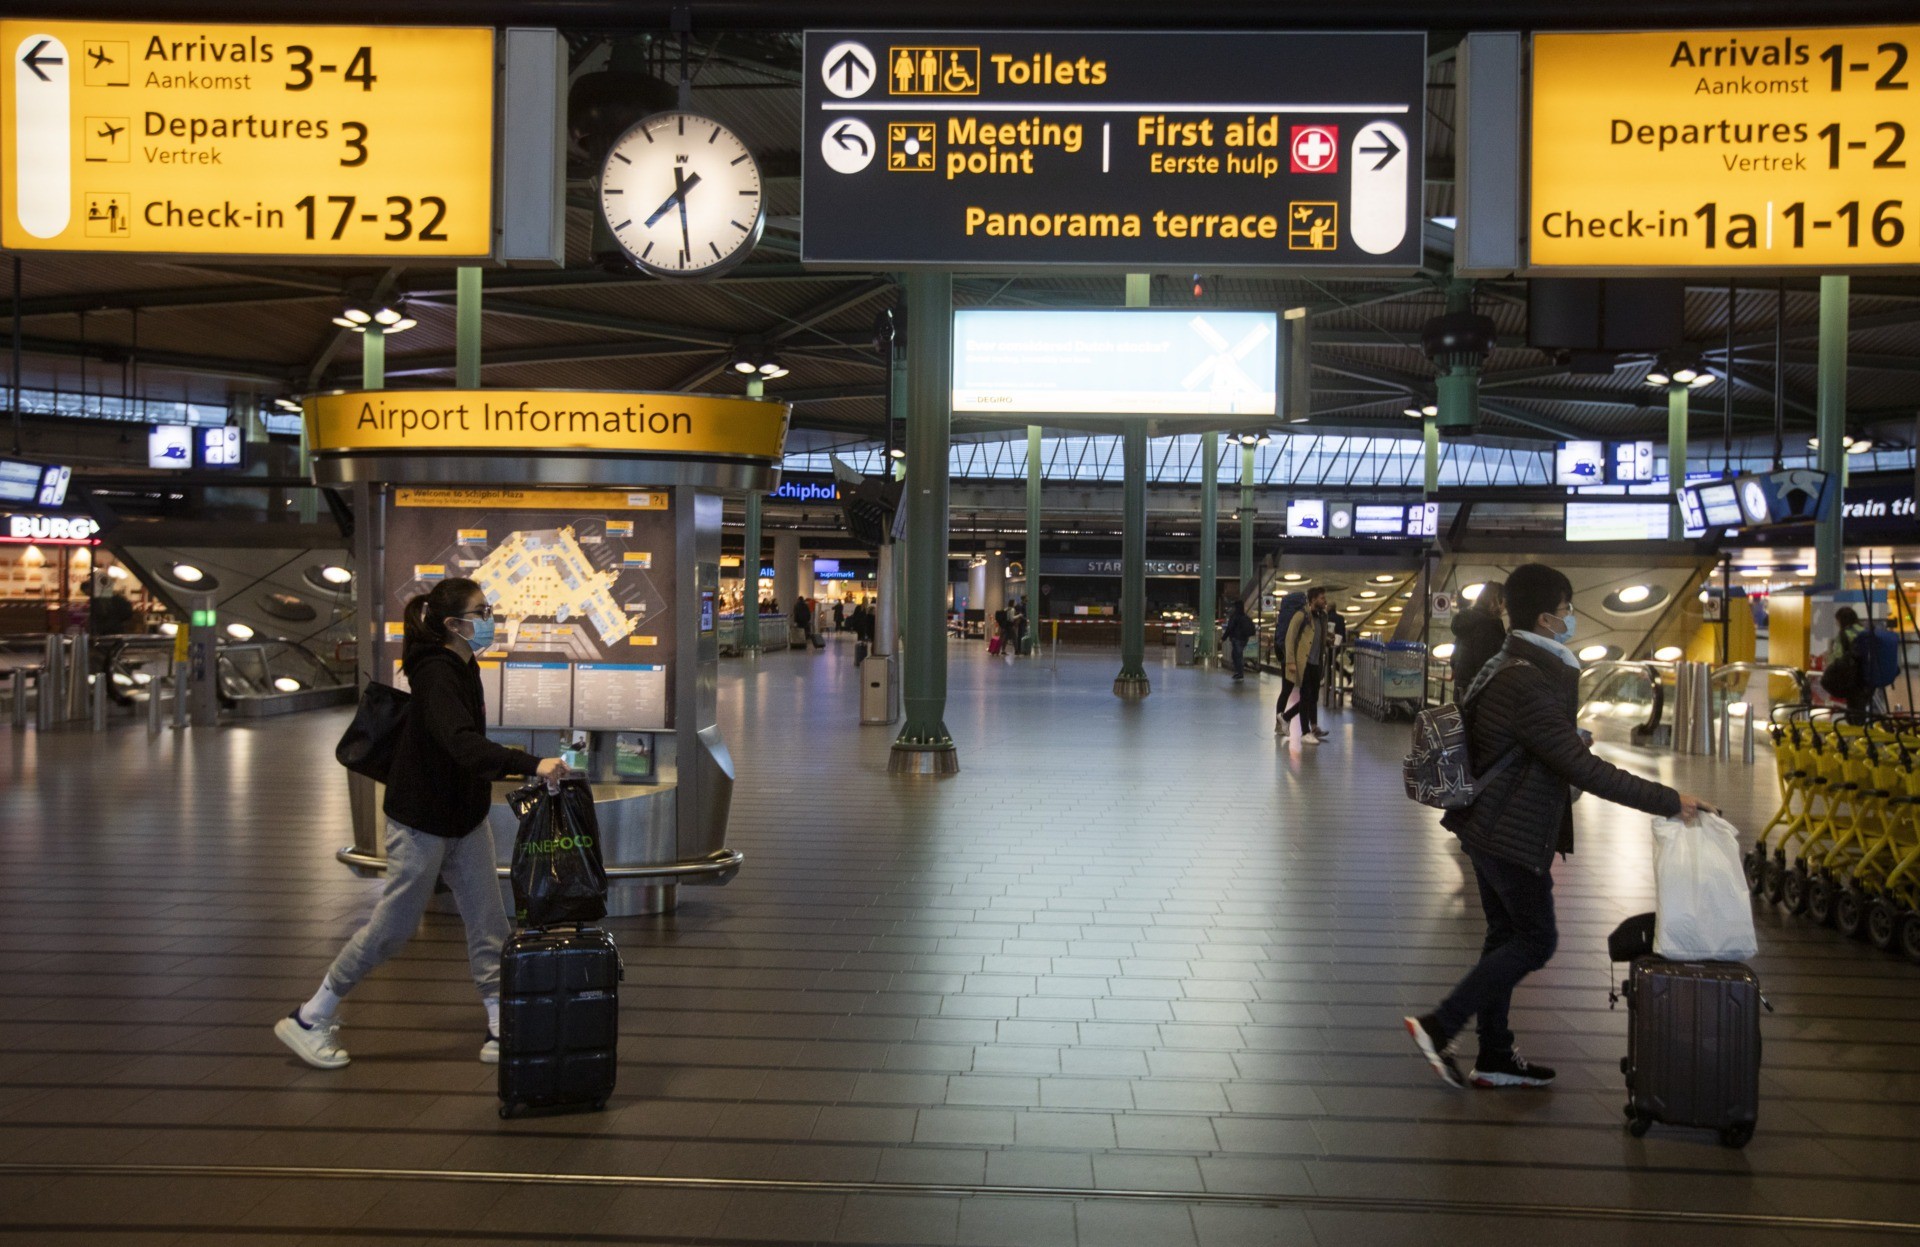 virus outbreak netherlands schiphol file photo dated thursday march 19 2020 travellers wearing